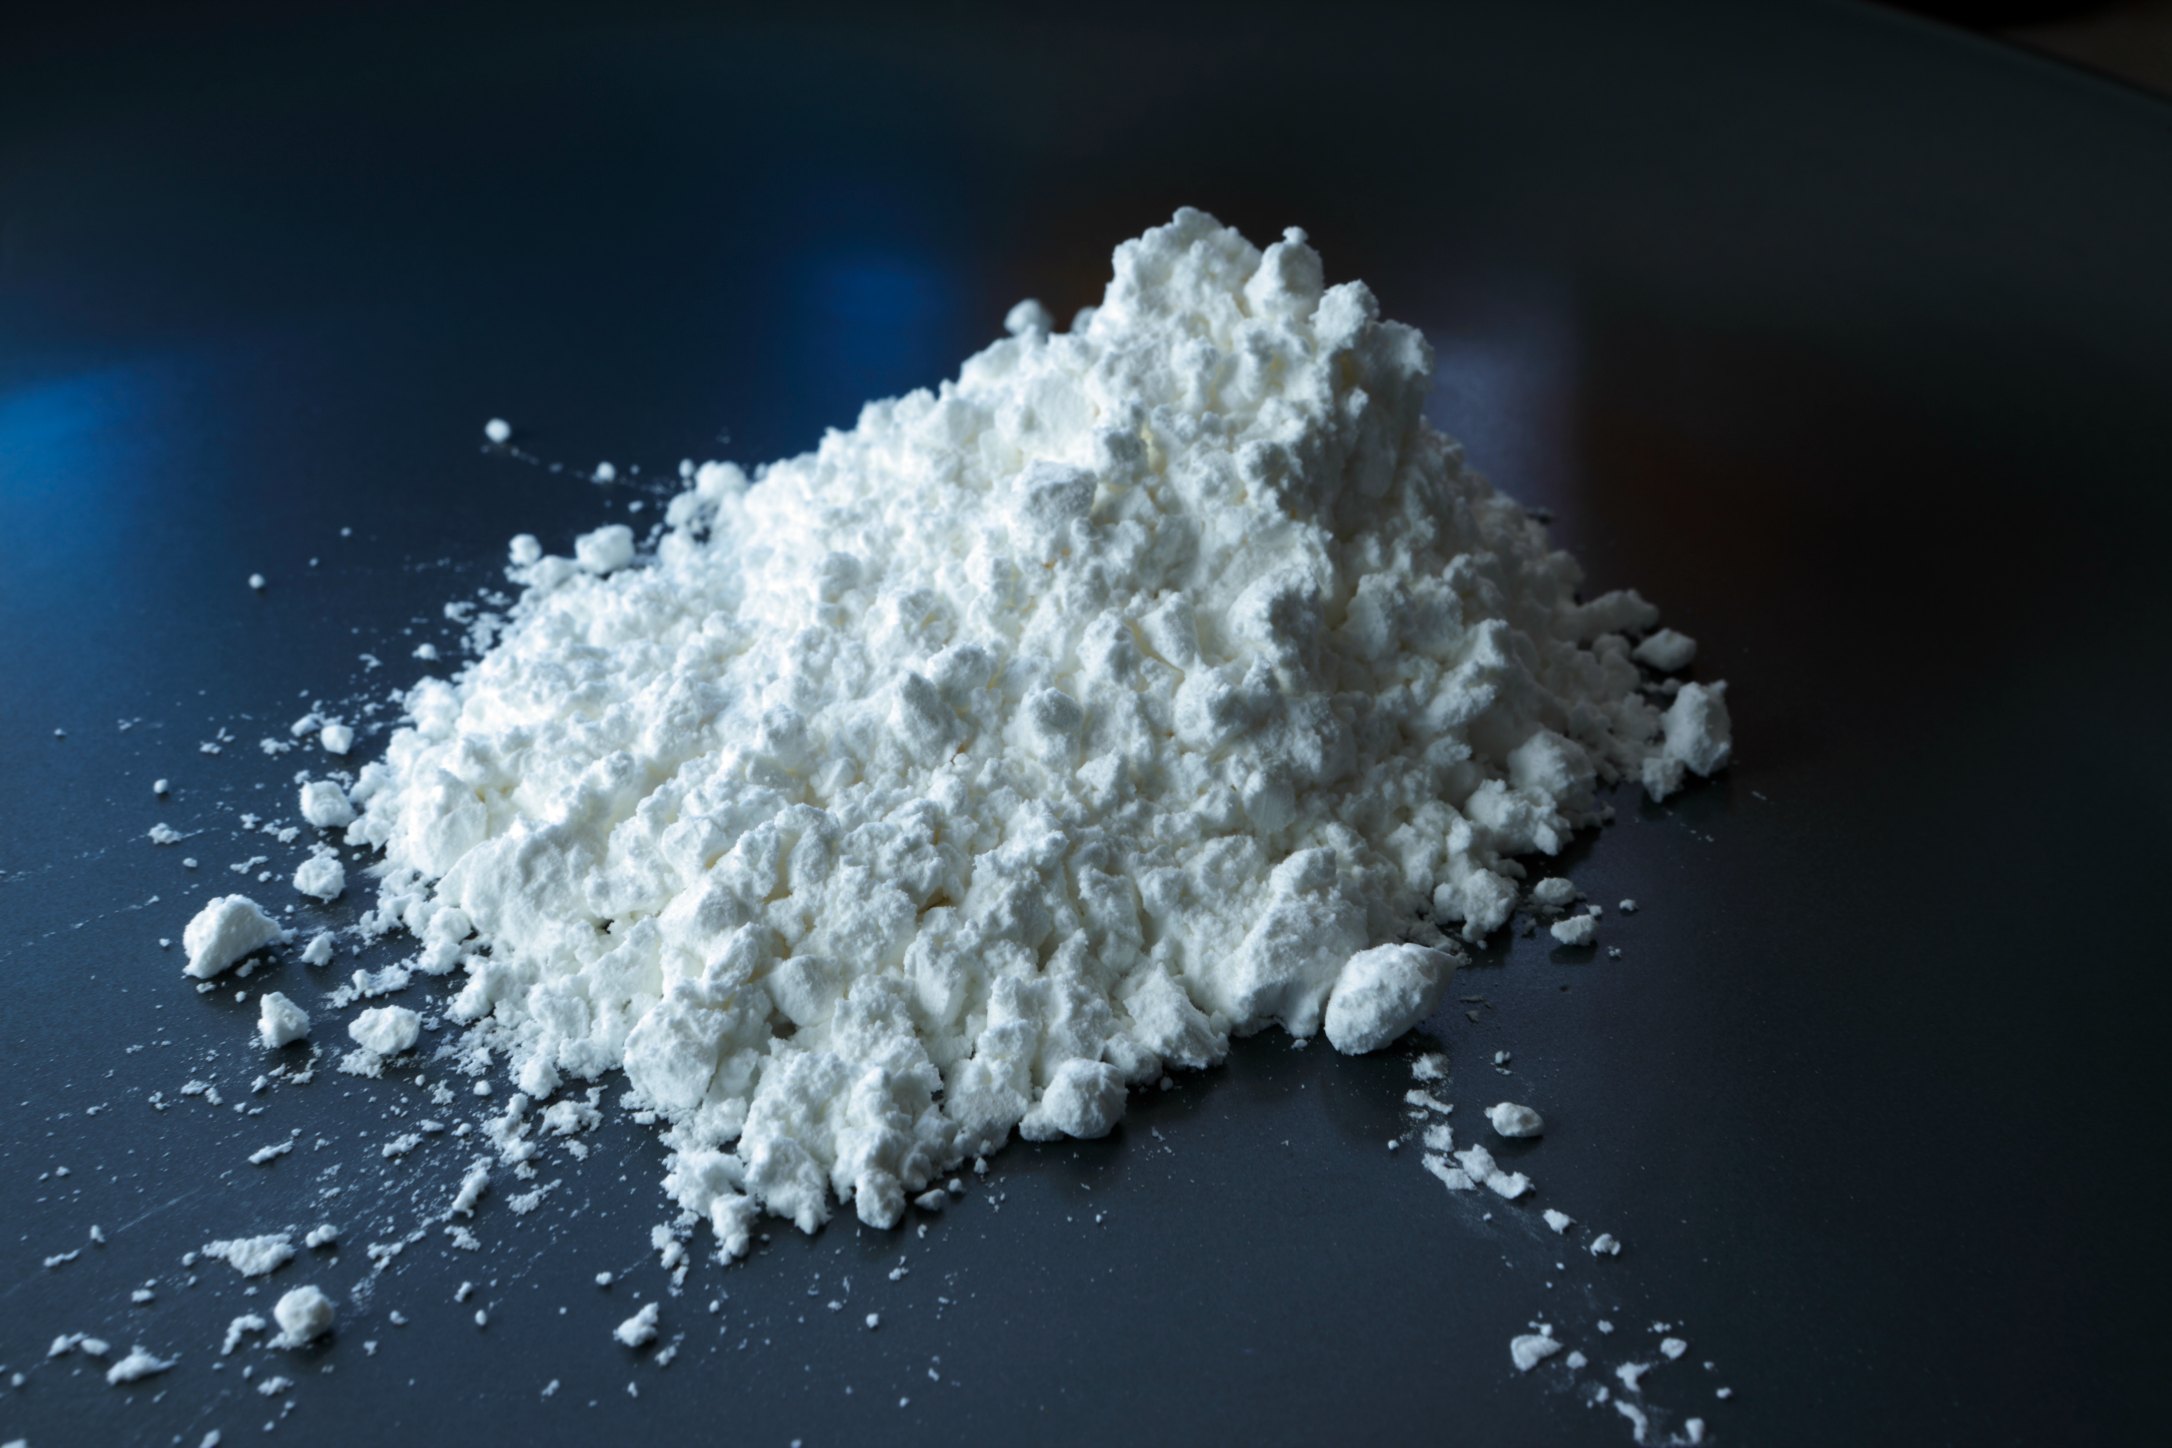 Potential new treatment for cocaine addiction - News - Cardiff University